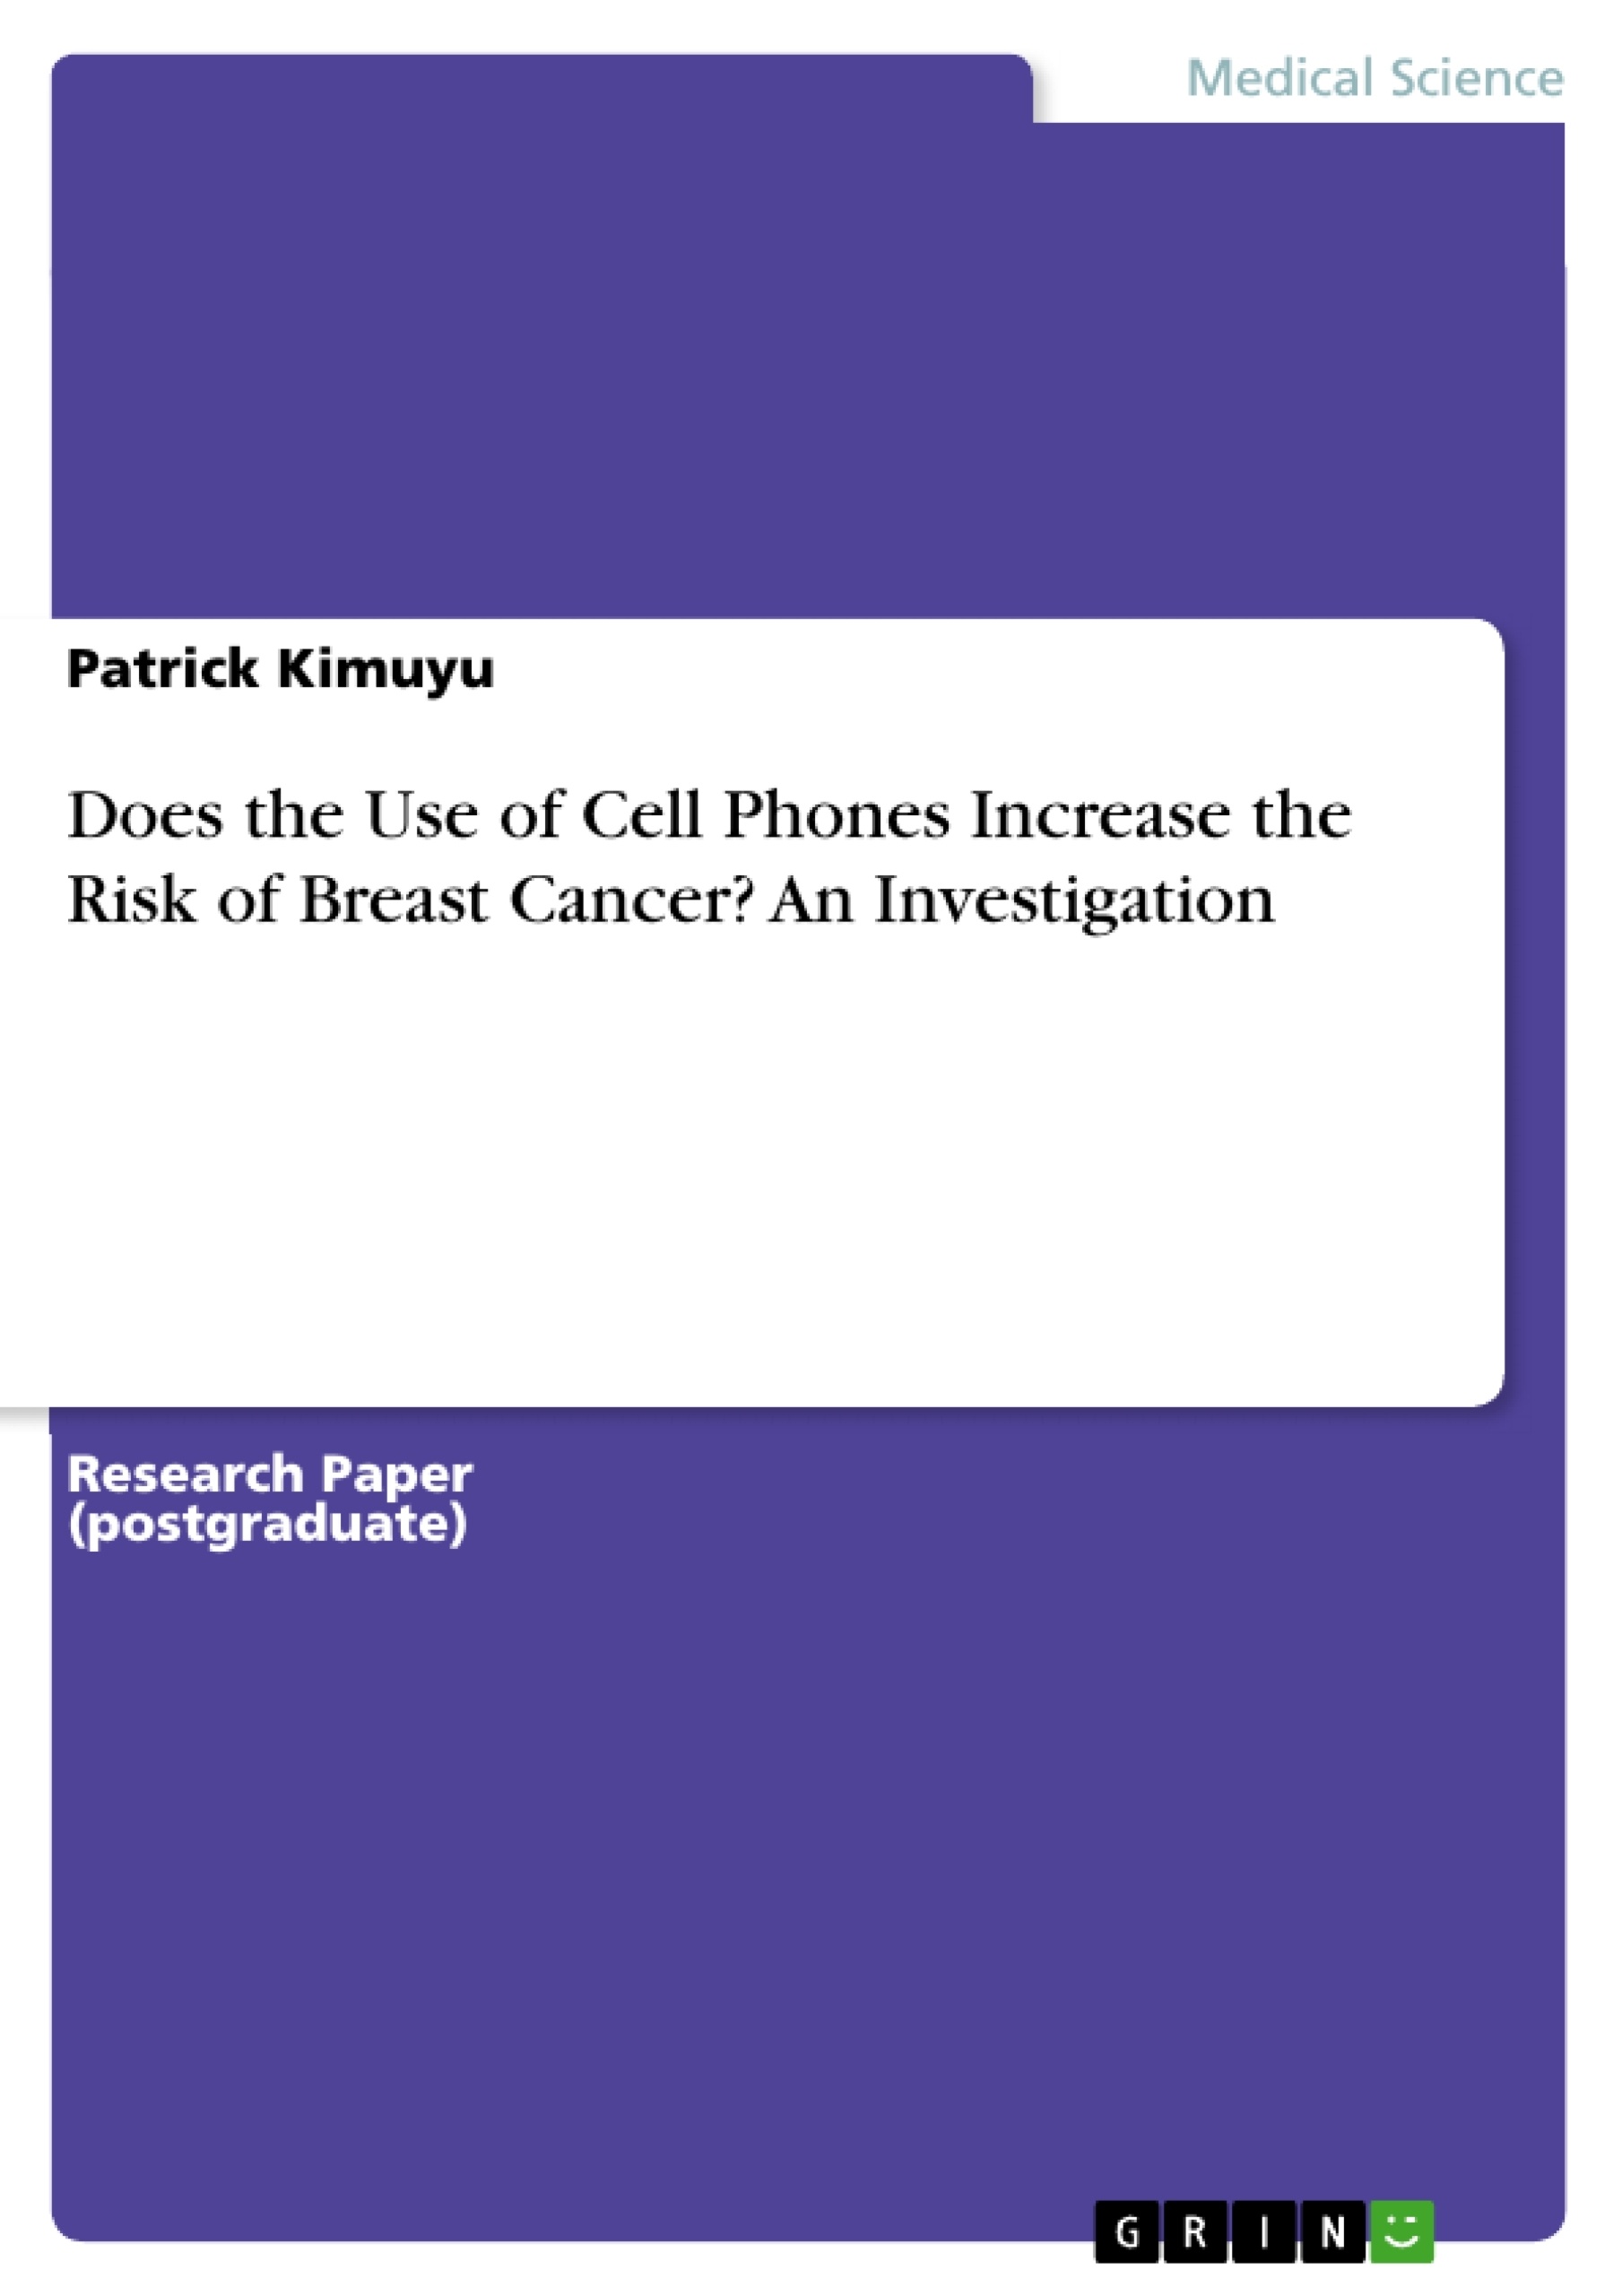 Title: Does the Use of Cell Phones Increase the Risk of Breast Cancer? An Investigation